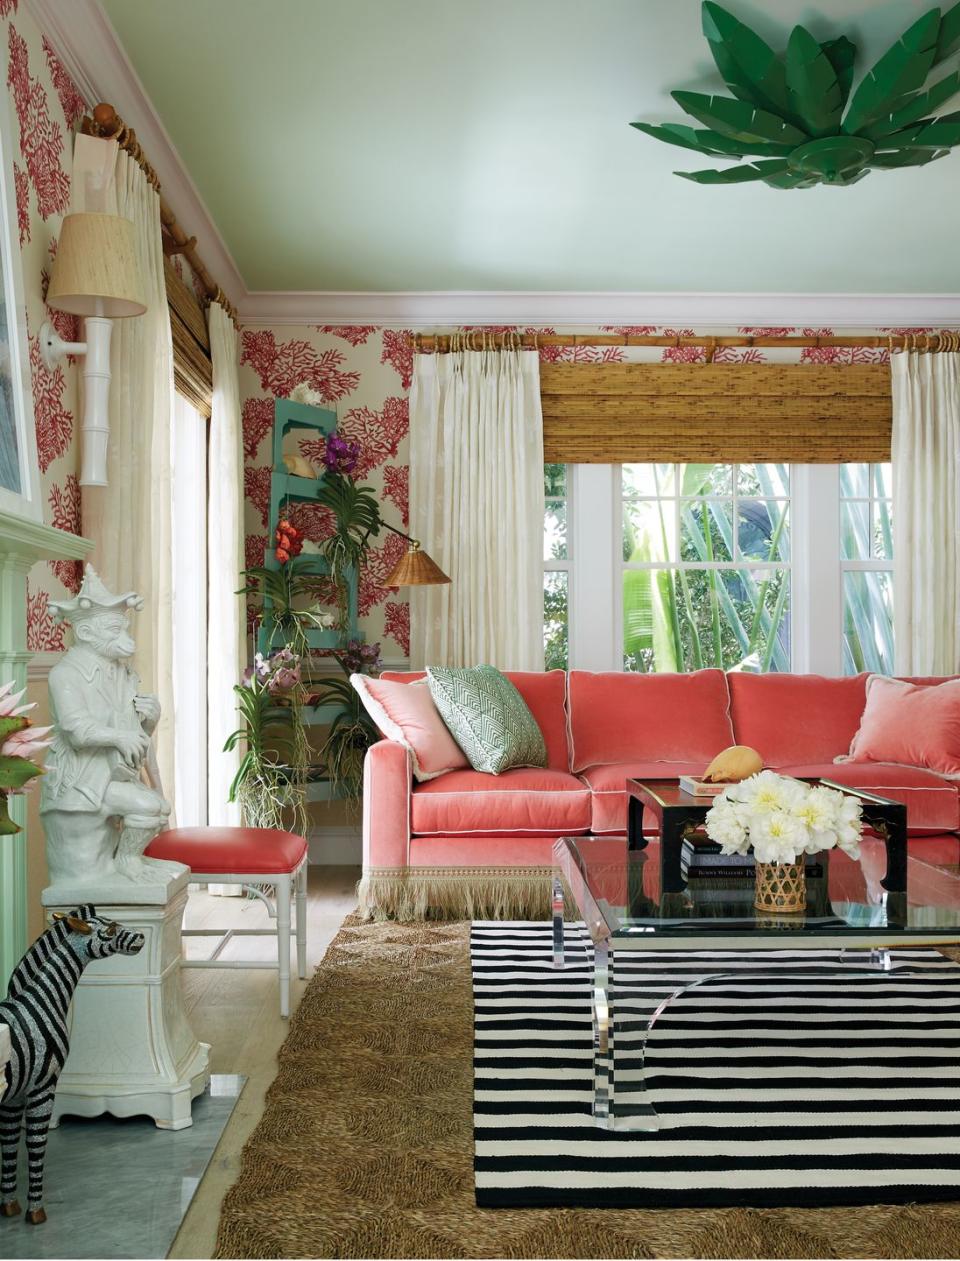 <p>Defined by its extroverted yet cultivated qualities, preppy rooms are "steadfast arenas for the tumble of life," according to Caponigro. Those drawn to the upbeat mode will most certainly love juicy pink and coral tones like those featured on the velvet sofa (Sophia Velvet) and playful wallcovering (Great Barrier Reef) in this Amanda Lindroth–designed living room. </p>